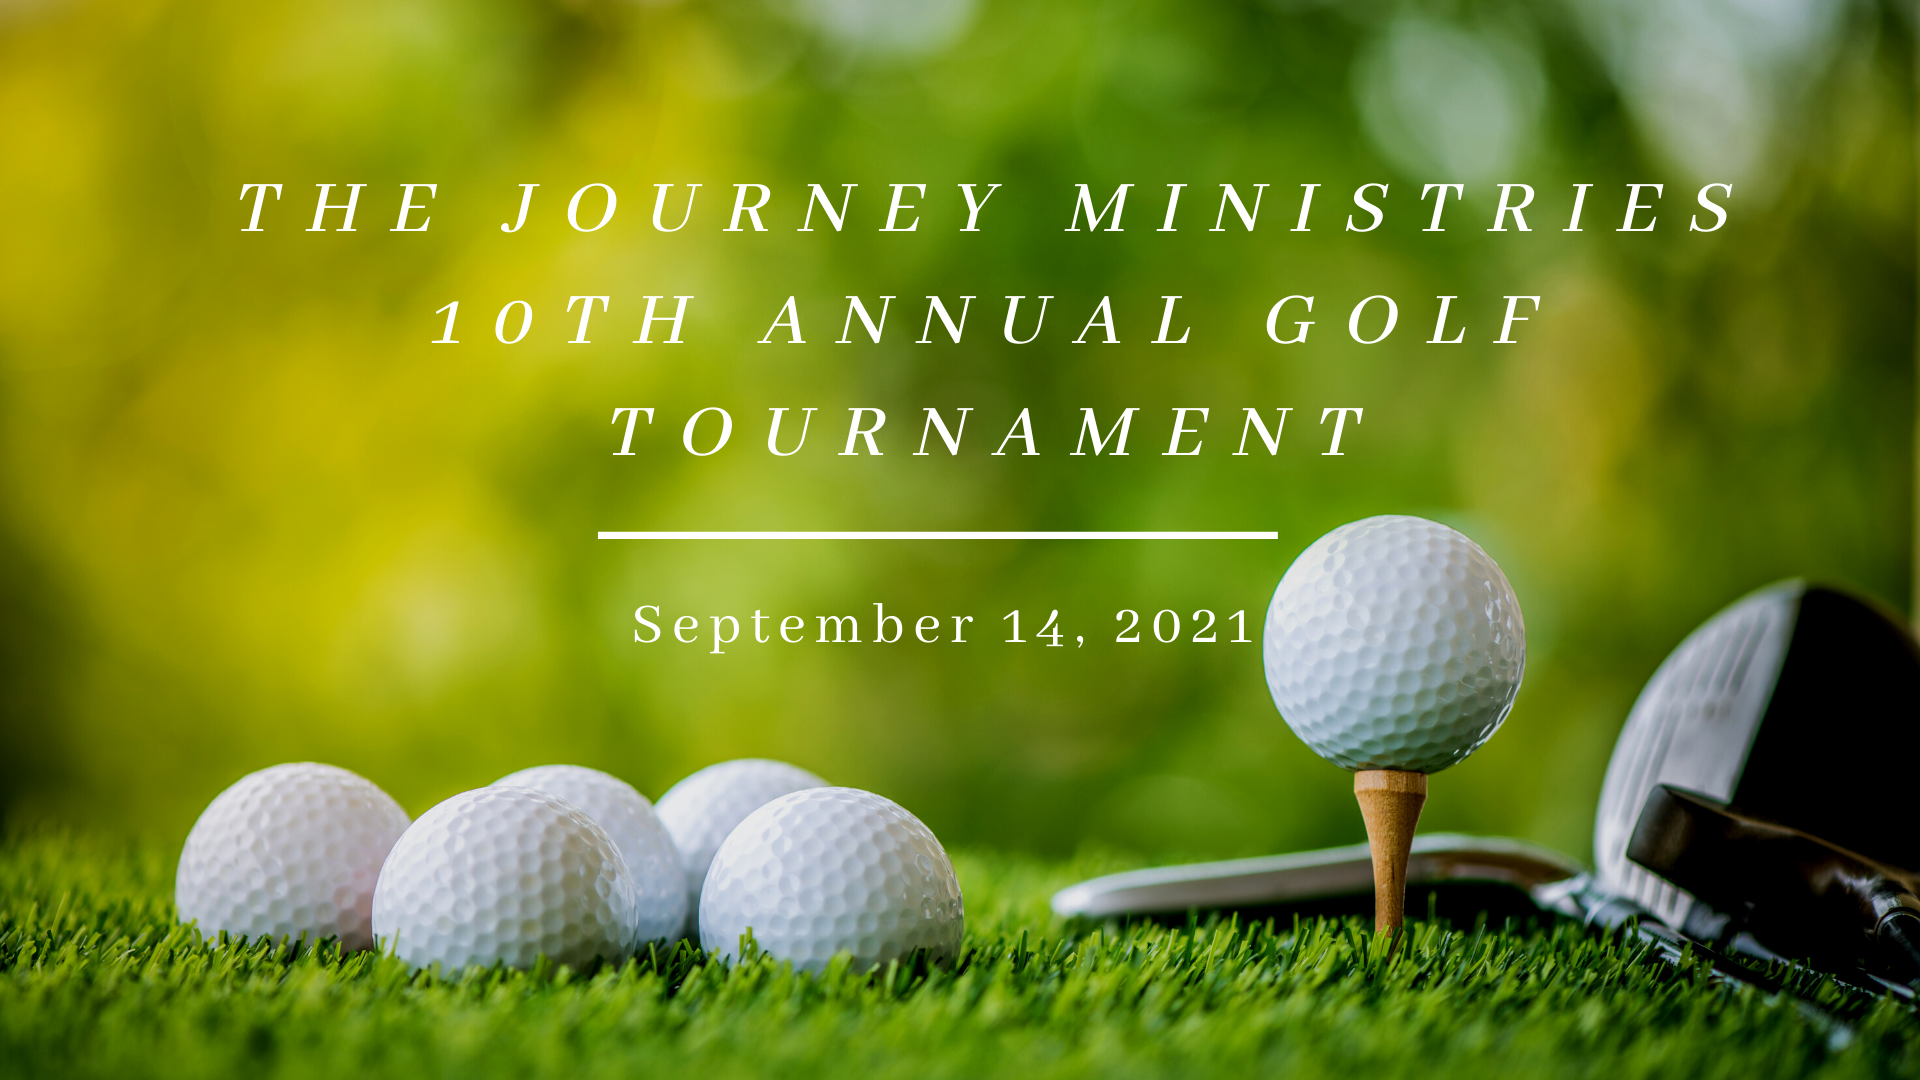 The Journey Ministries 10th Annual Golf Tournament